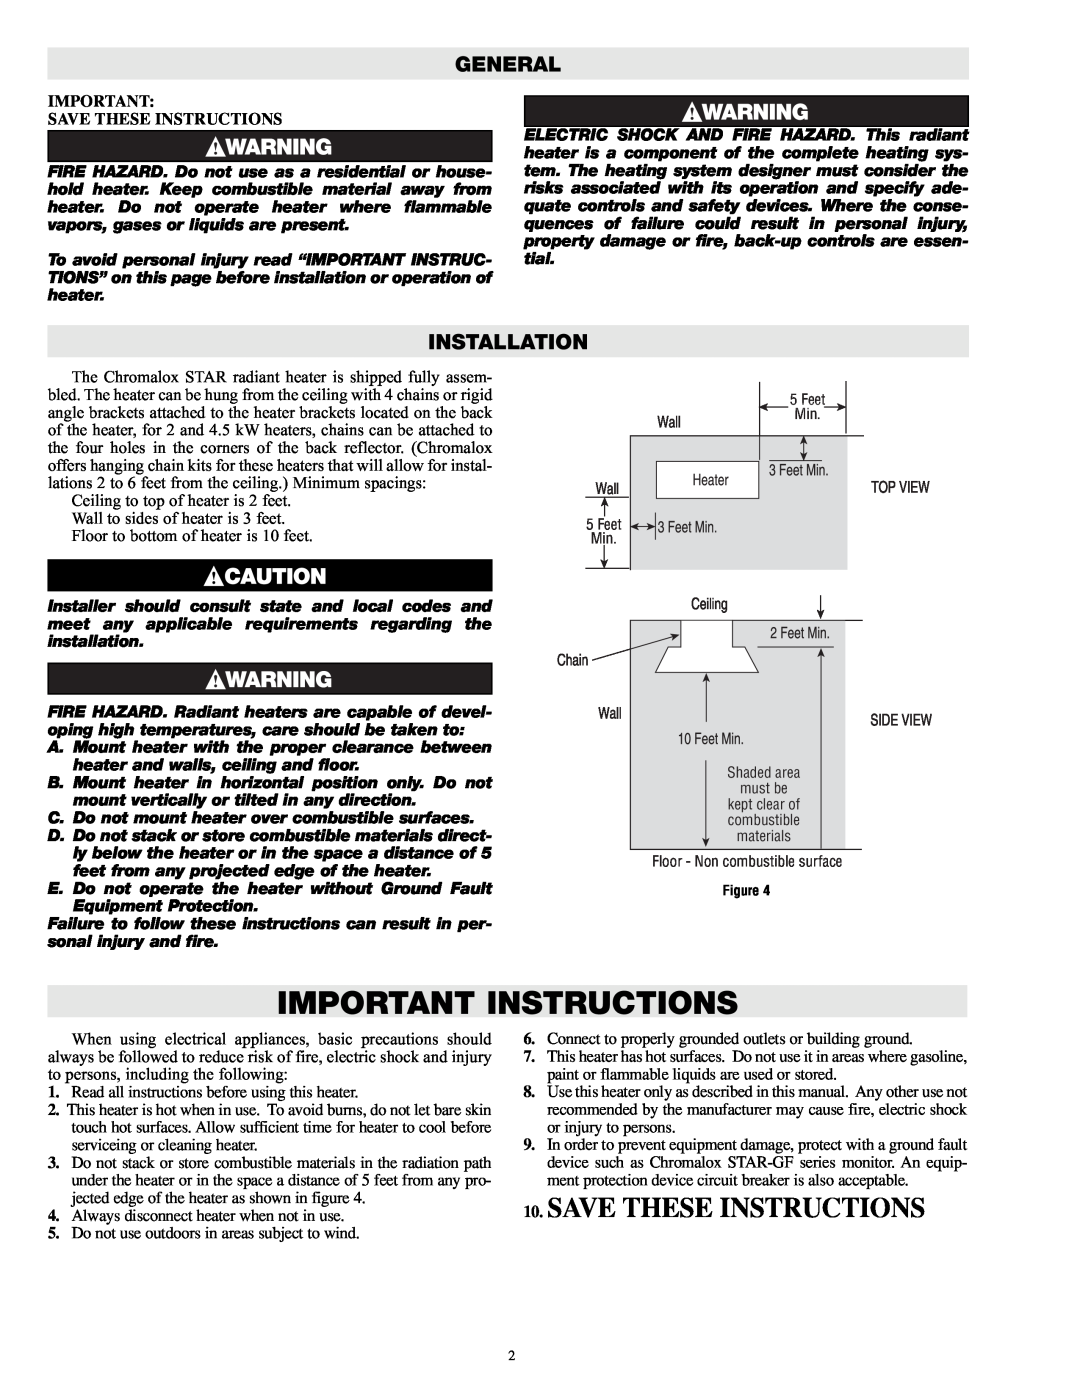 Chromalox PG434-4, PG434-3 specifications General, Installation, Save These Instructions, Important Instructions 